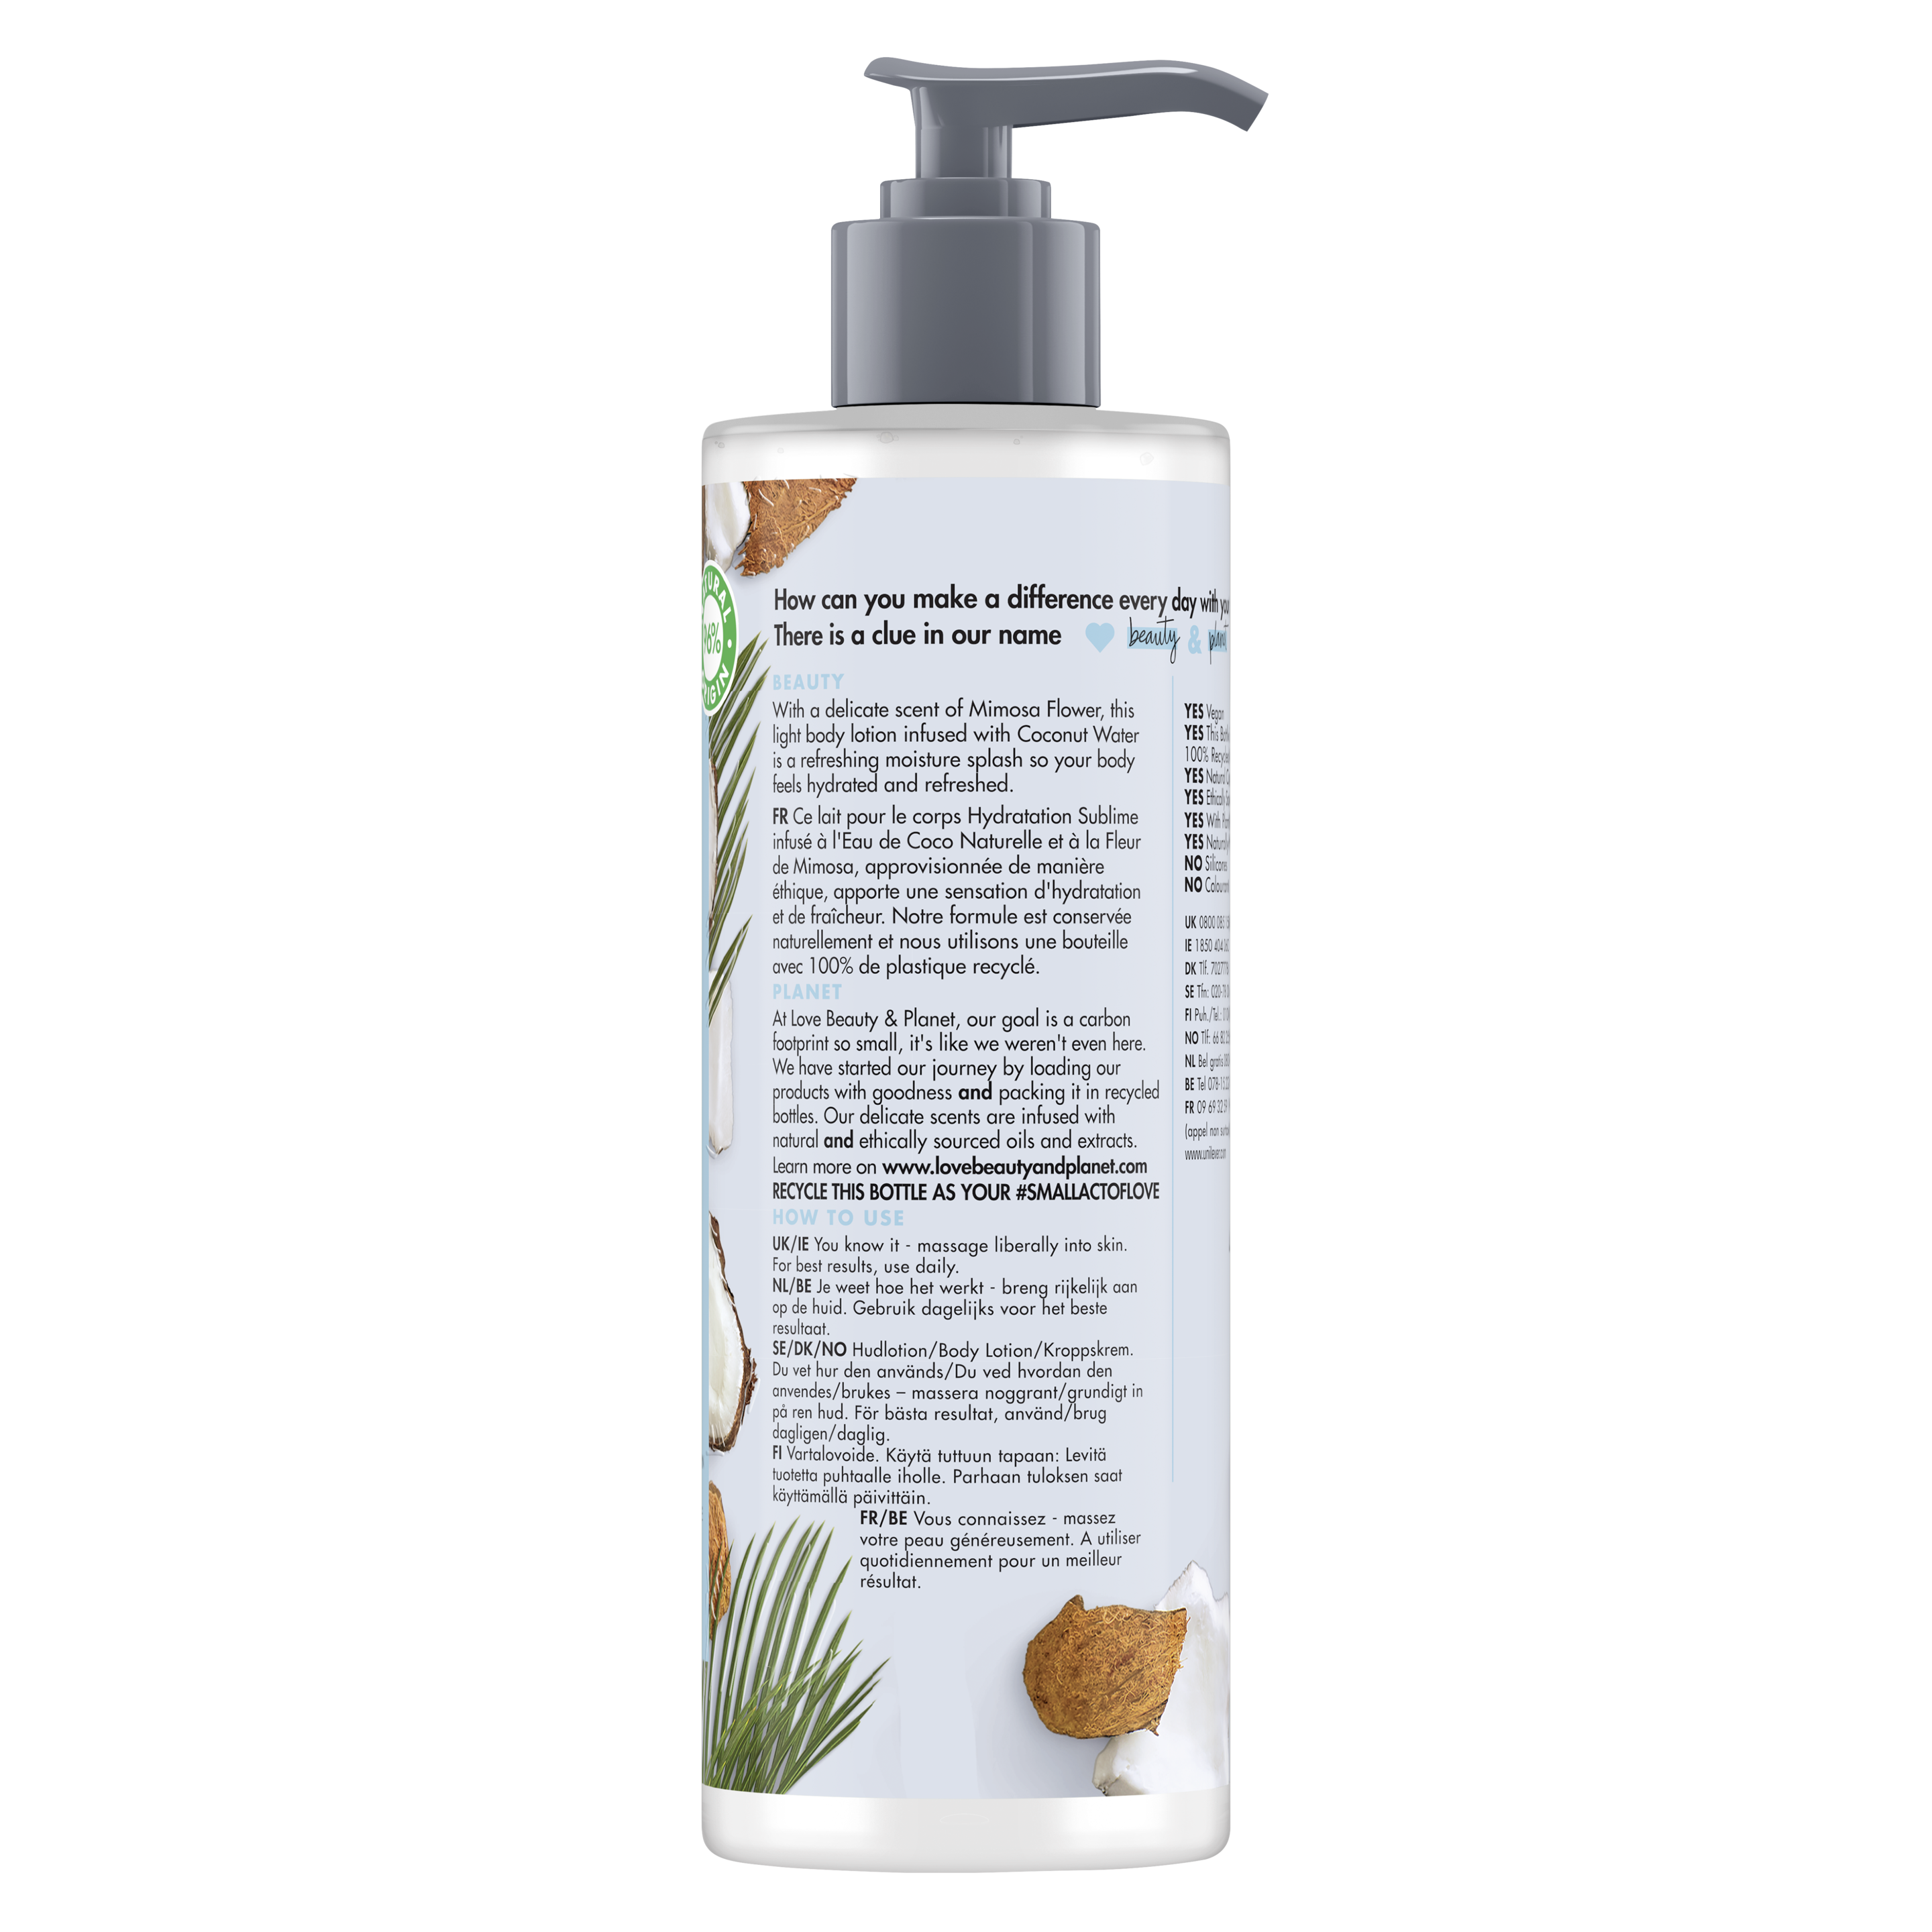 coconut water & mimosa flower body lotion